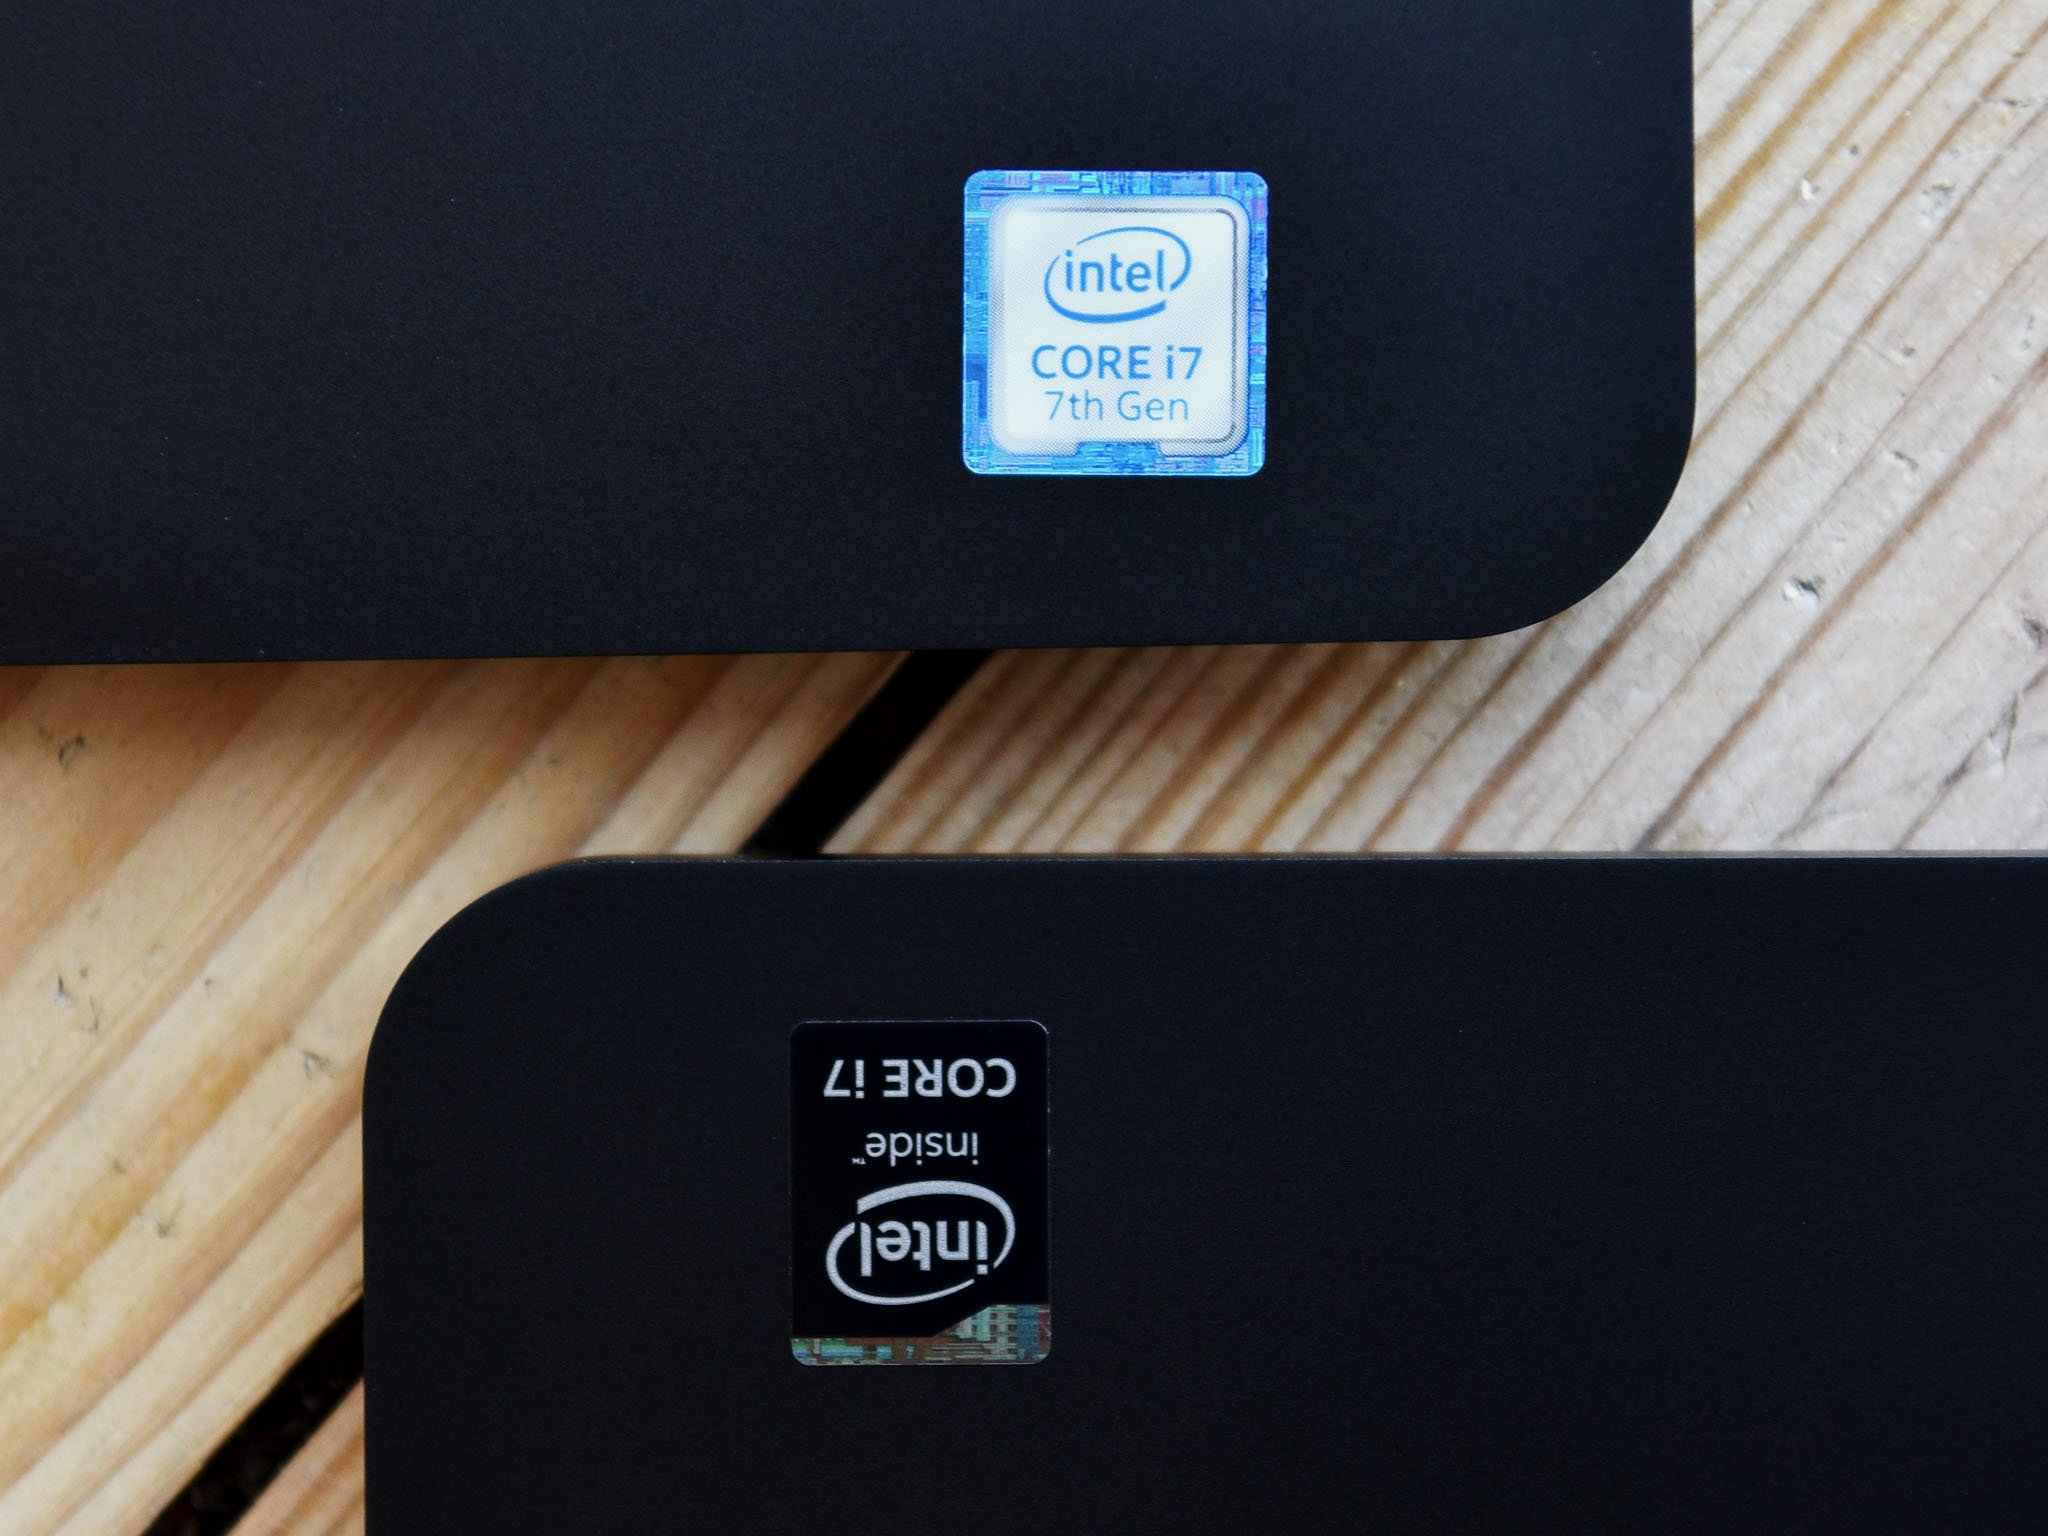 Intel turns to its integrated graphics to scan for viruses